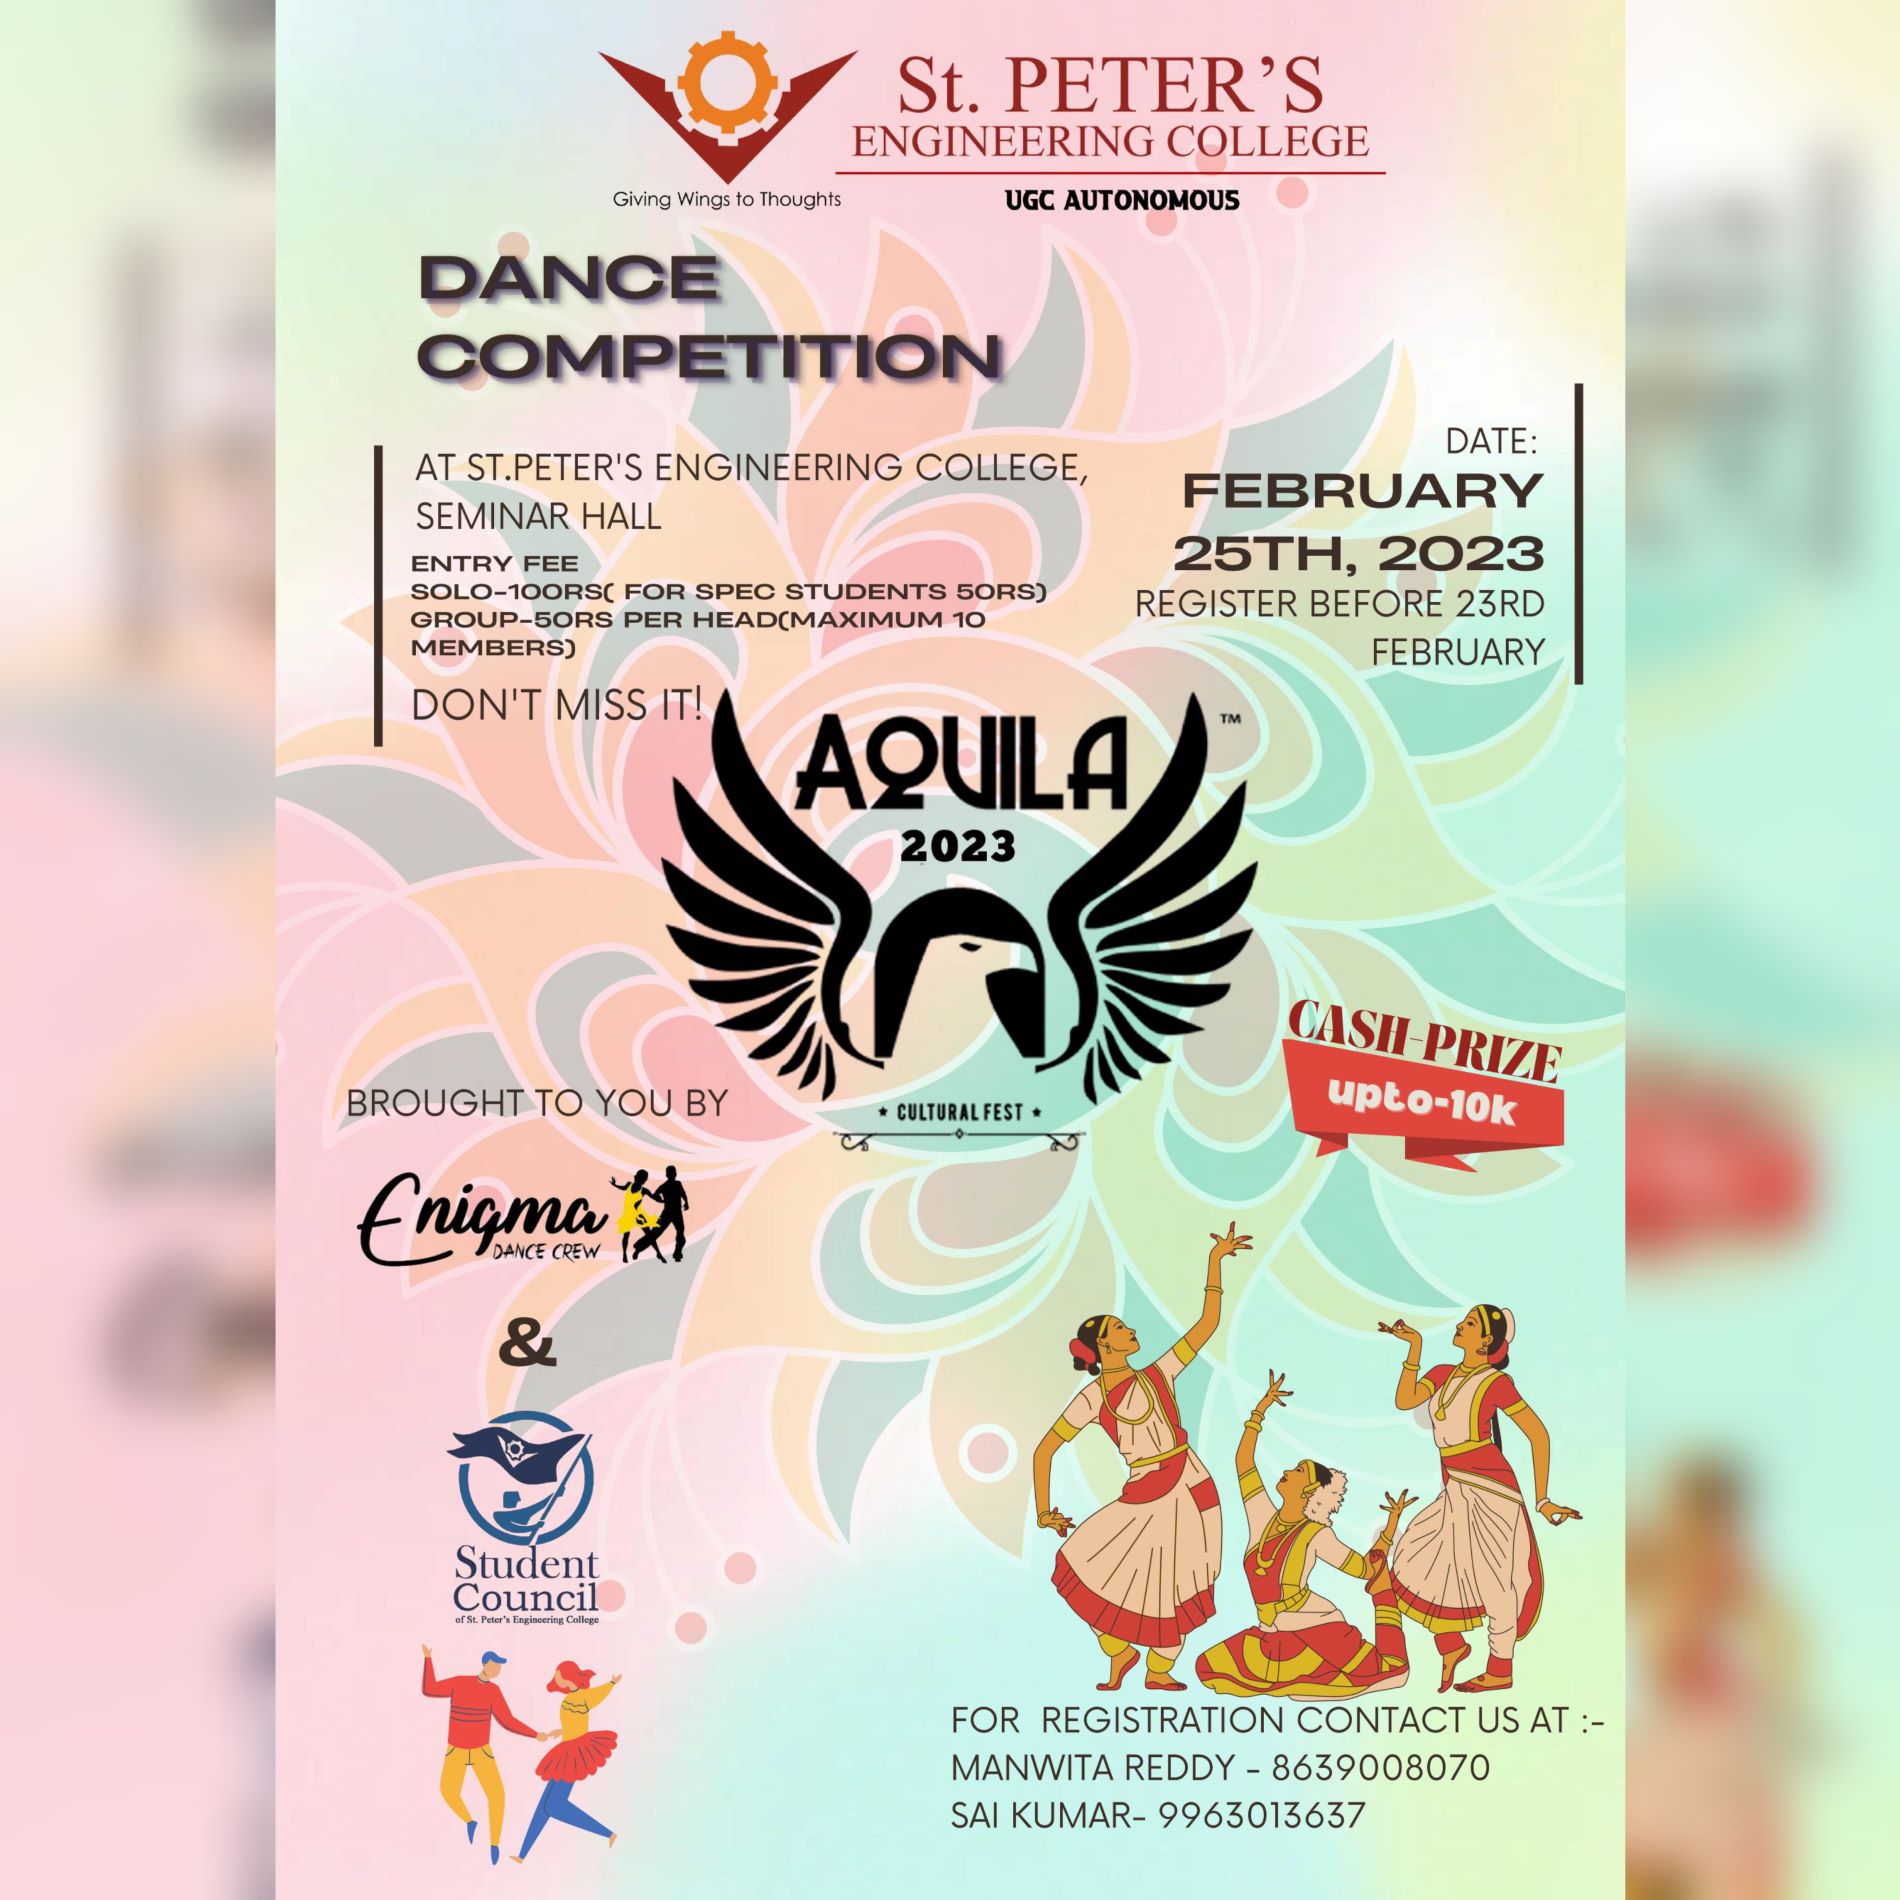 DANCE COMPETITION 